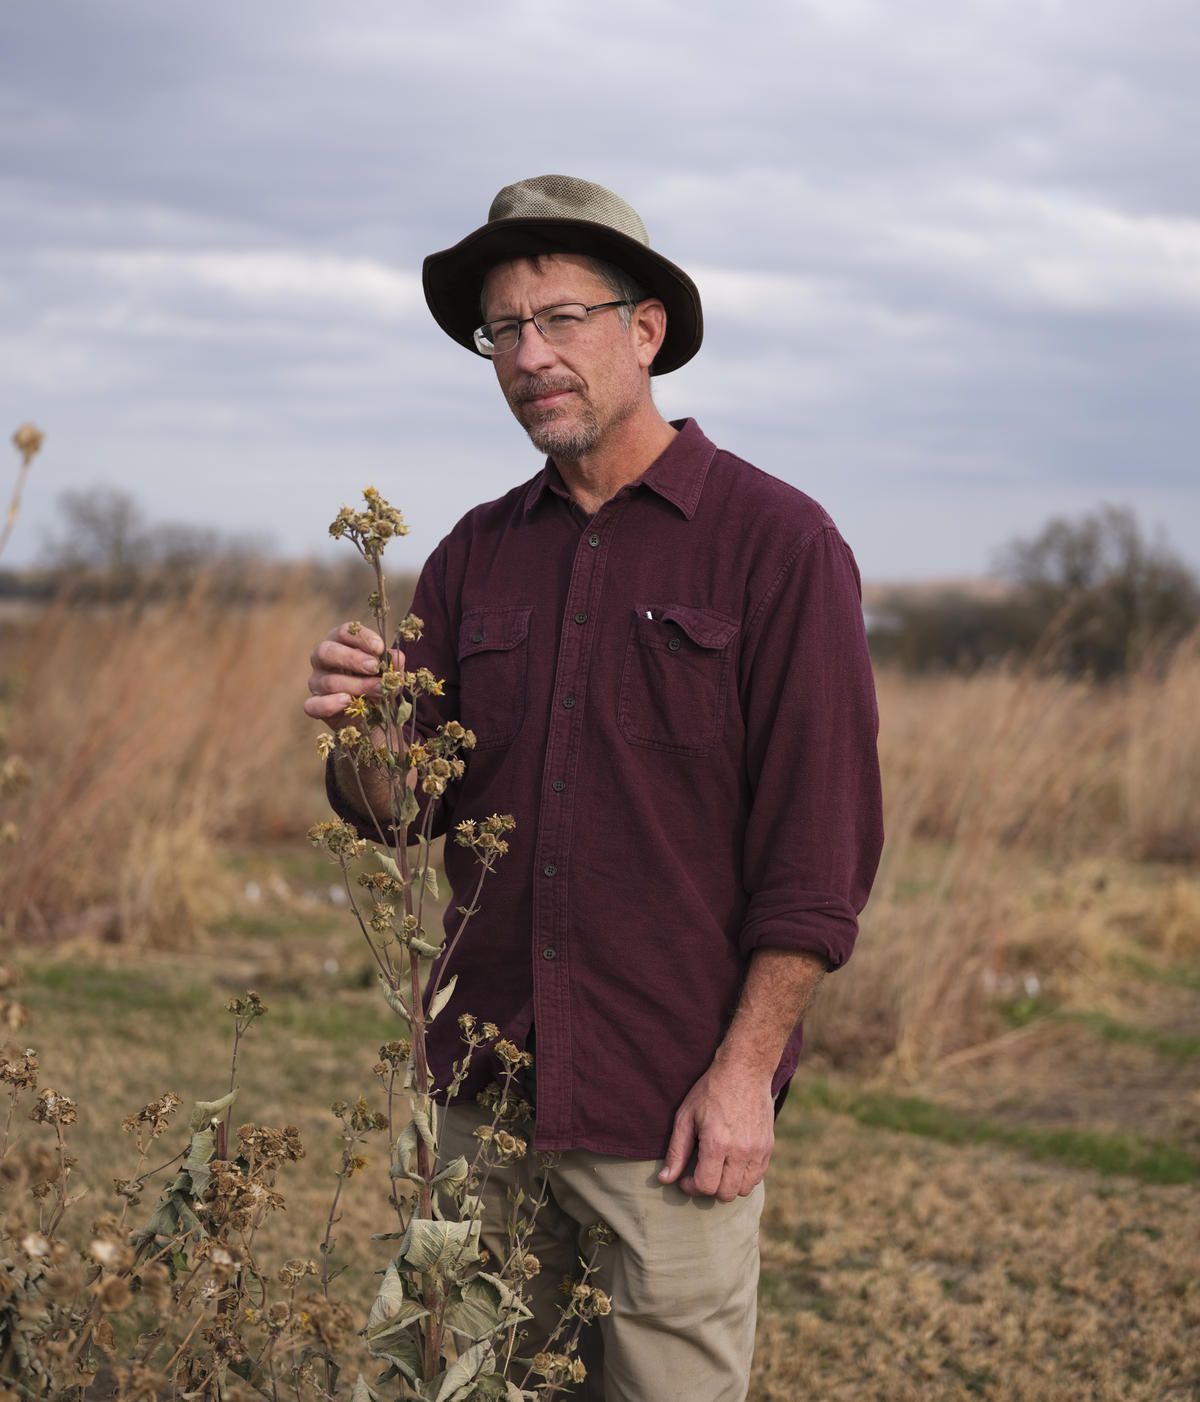 Plant breeder David Van Tassel of The Land Institute in Salina, Kansas, is working with silphium, a native plant related to sunflower. His goal is to create a perennial crop that could become a player in global agriculture. Image by Kyler Zeleny / For Harvest Public Media. United States, 2020.